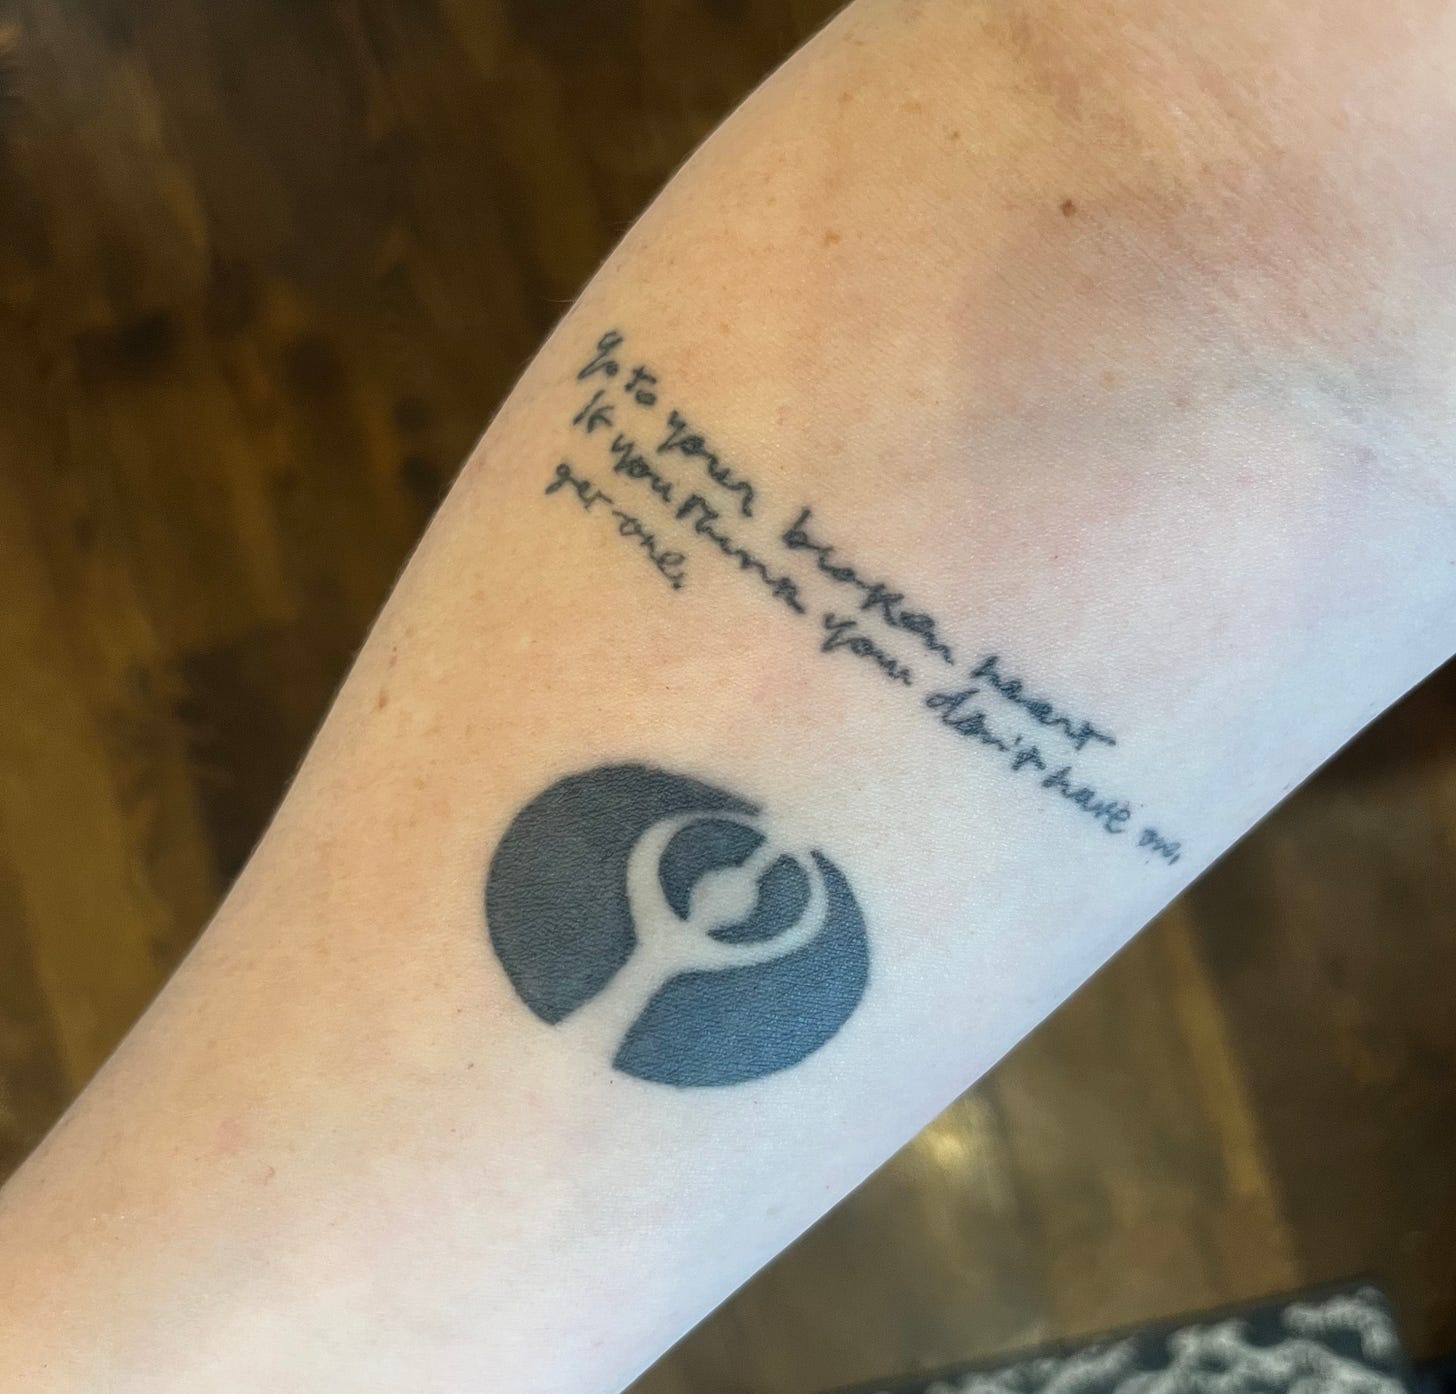 Amber's tattoo of the opening lines of "Path."